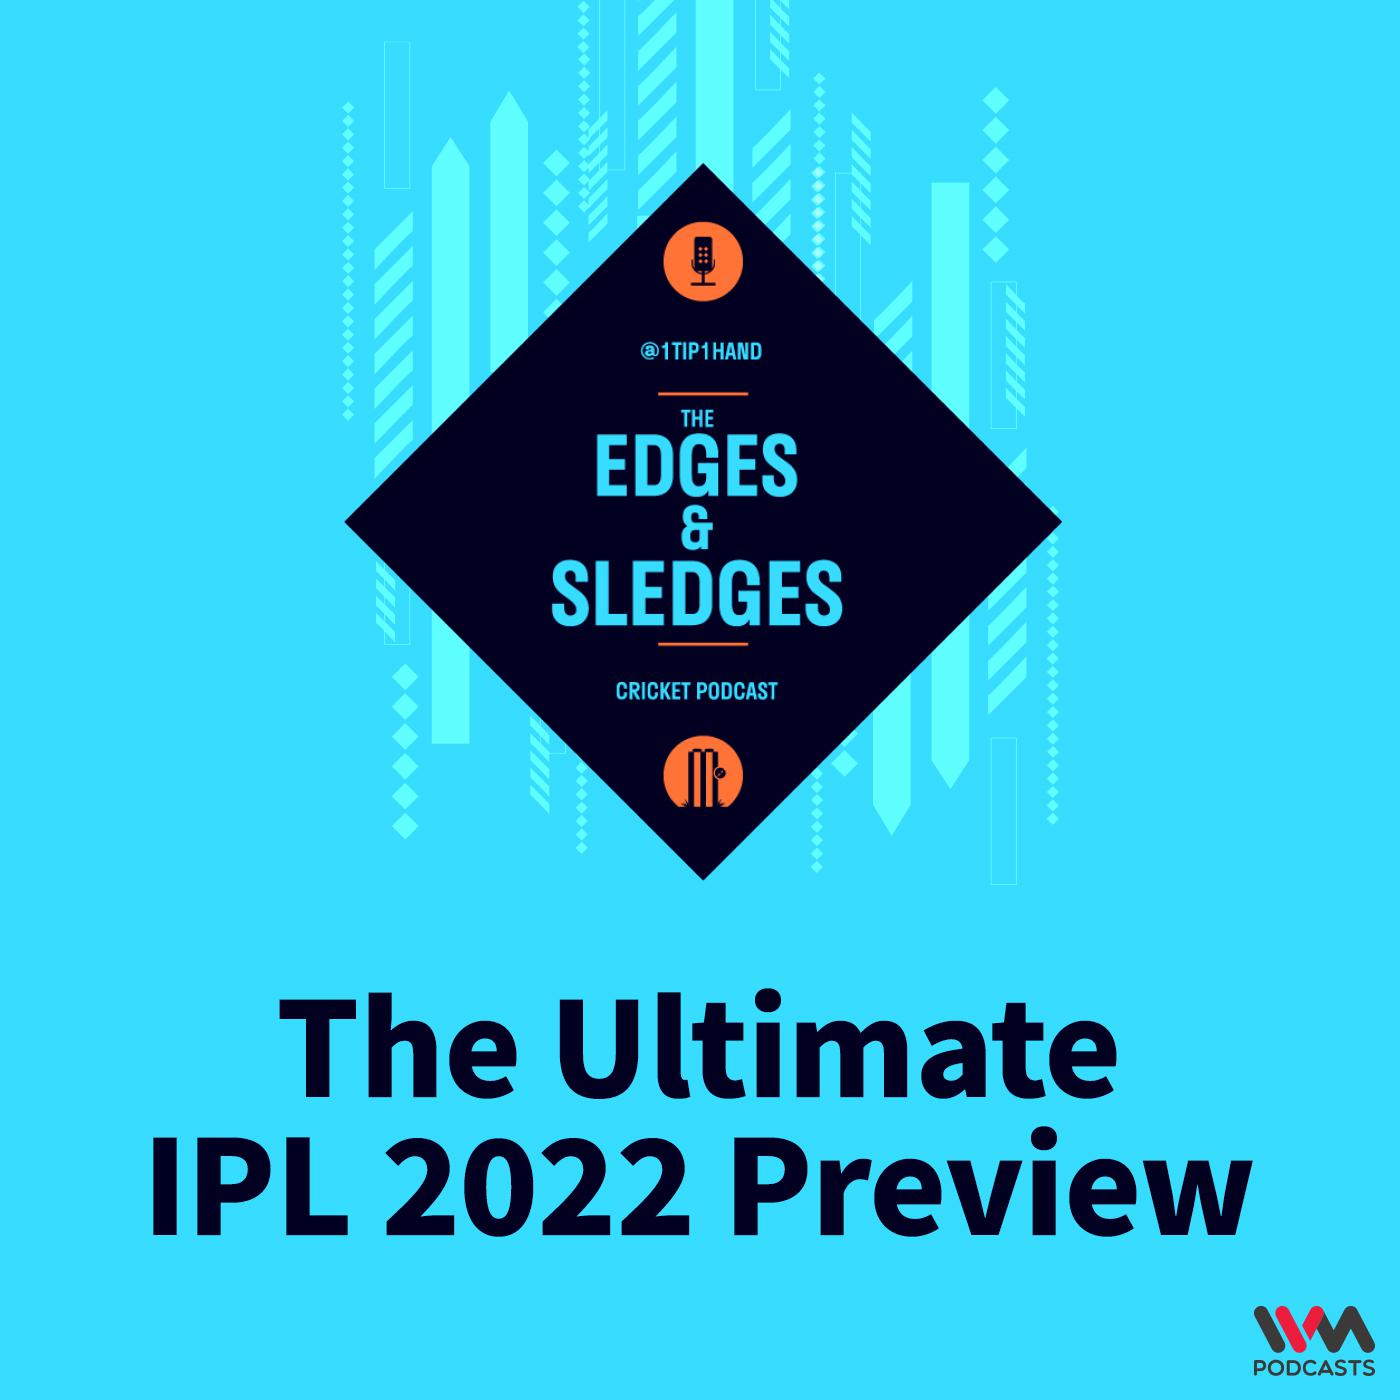 The Ultimate IPL 2022 Preview